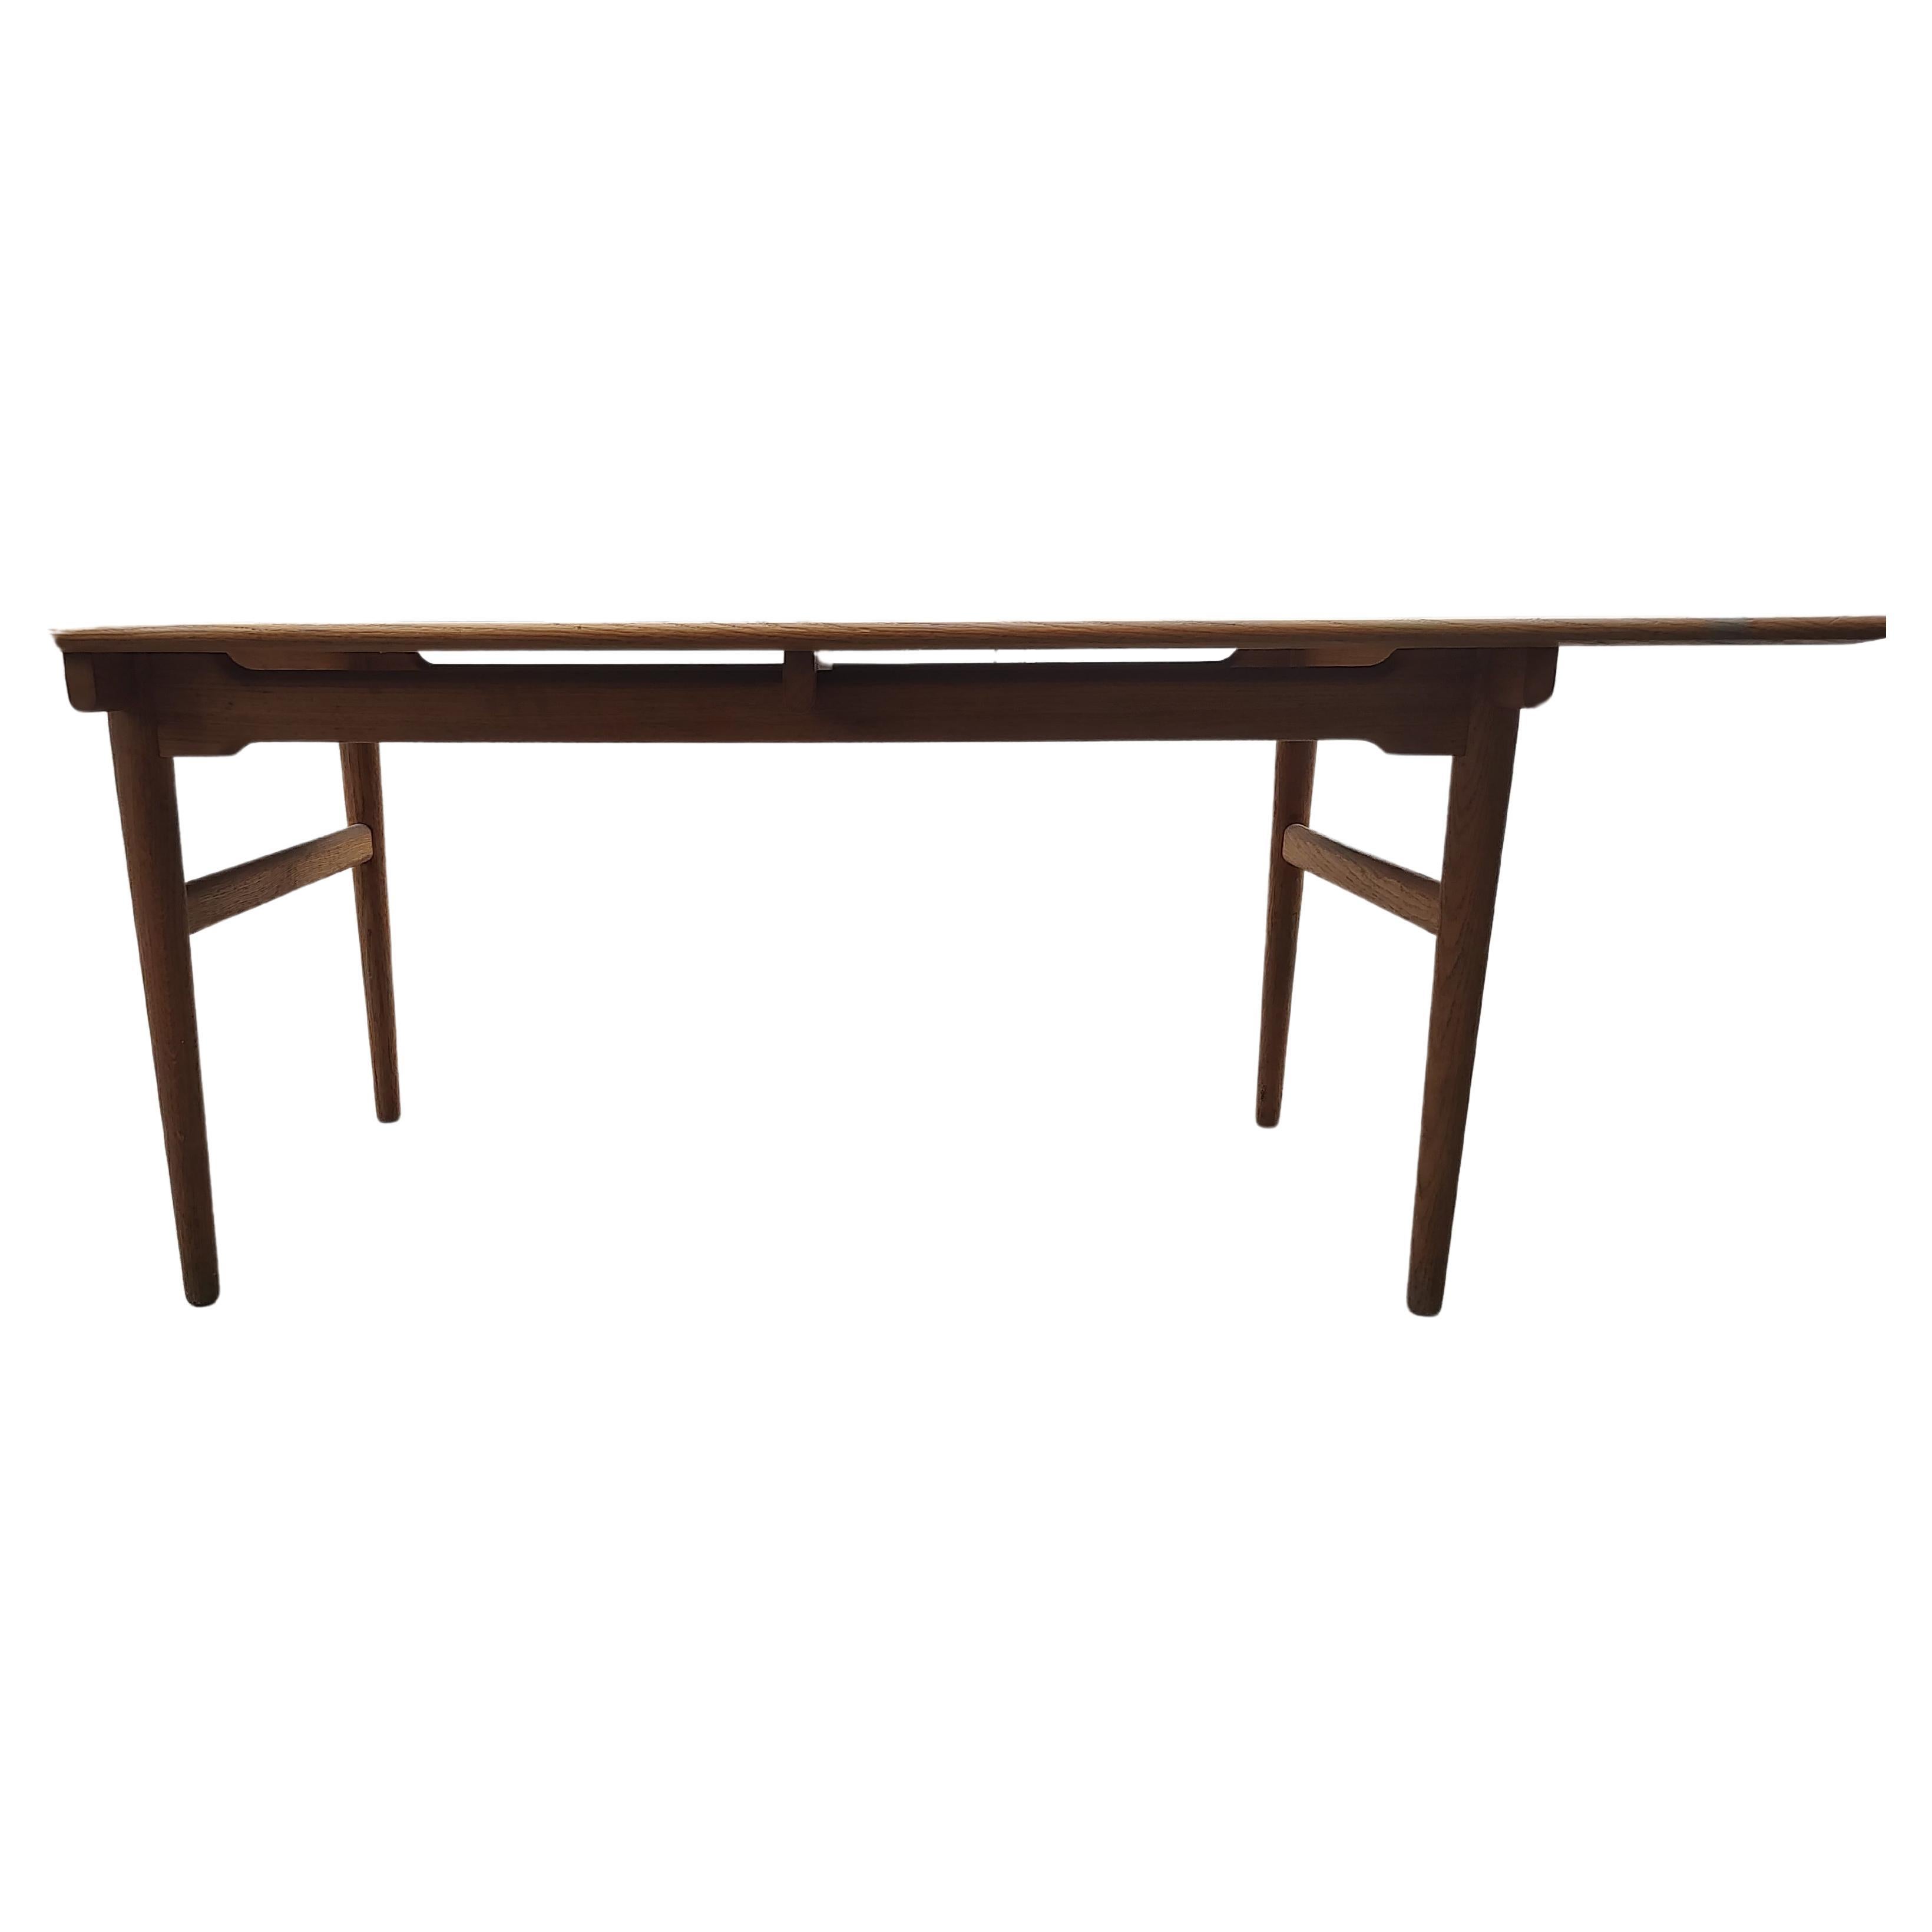 Fantastic simple yet very elegant dining table CH327 by Hans J Wegner  for Carl Hansen & Son. Oak top with a teak frame and legs. Solid wood top appears to be floating above the frame. Signed, tagged in center of tables underside. Beautiful sculpted